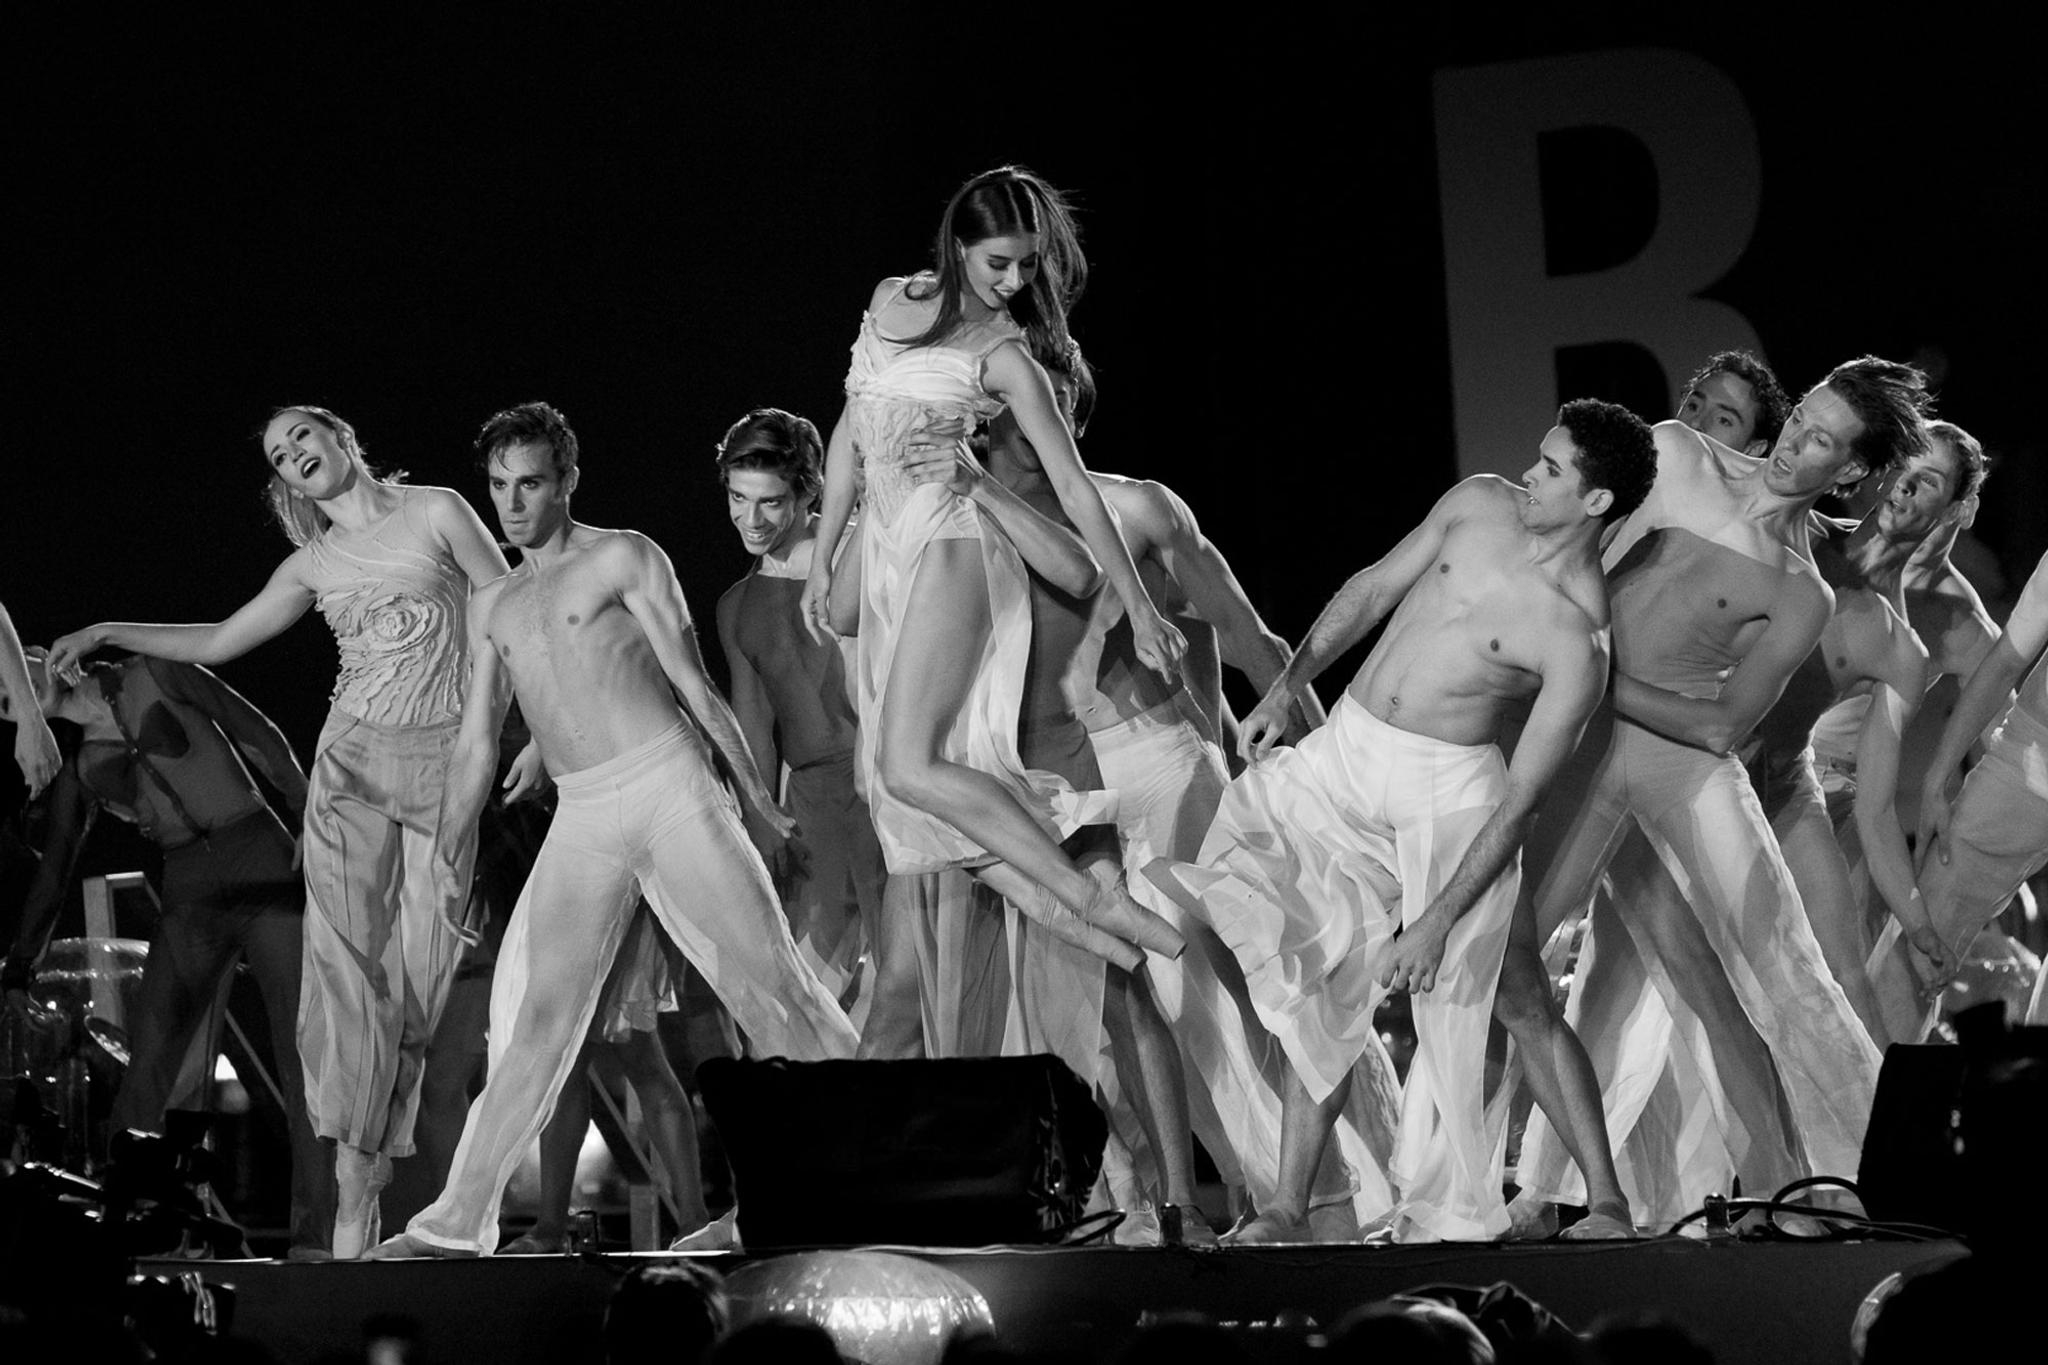 A black and white photo of a group of dancers. One lifts another up by the waist.